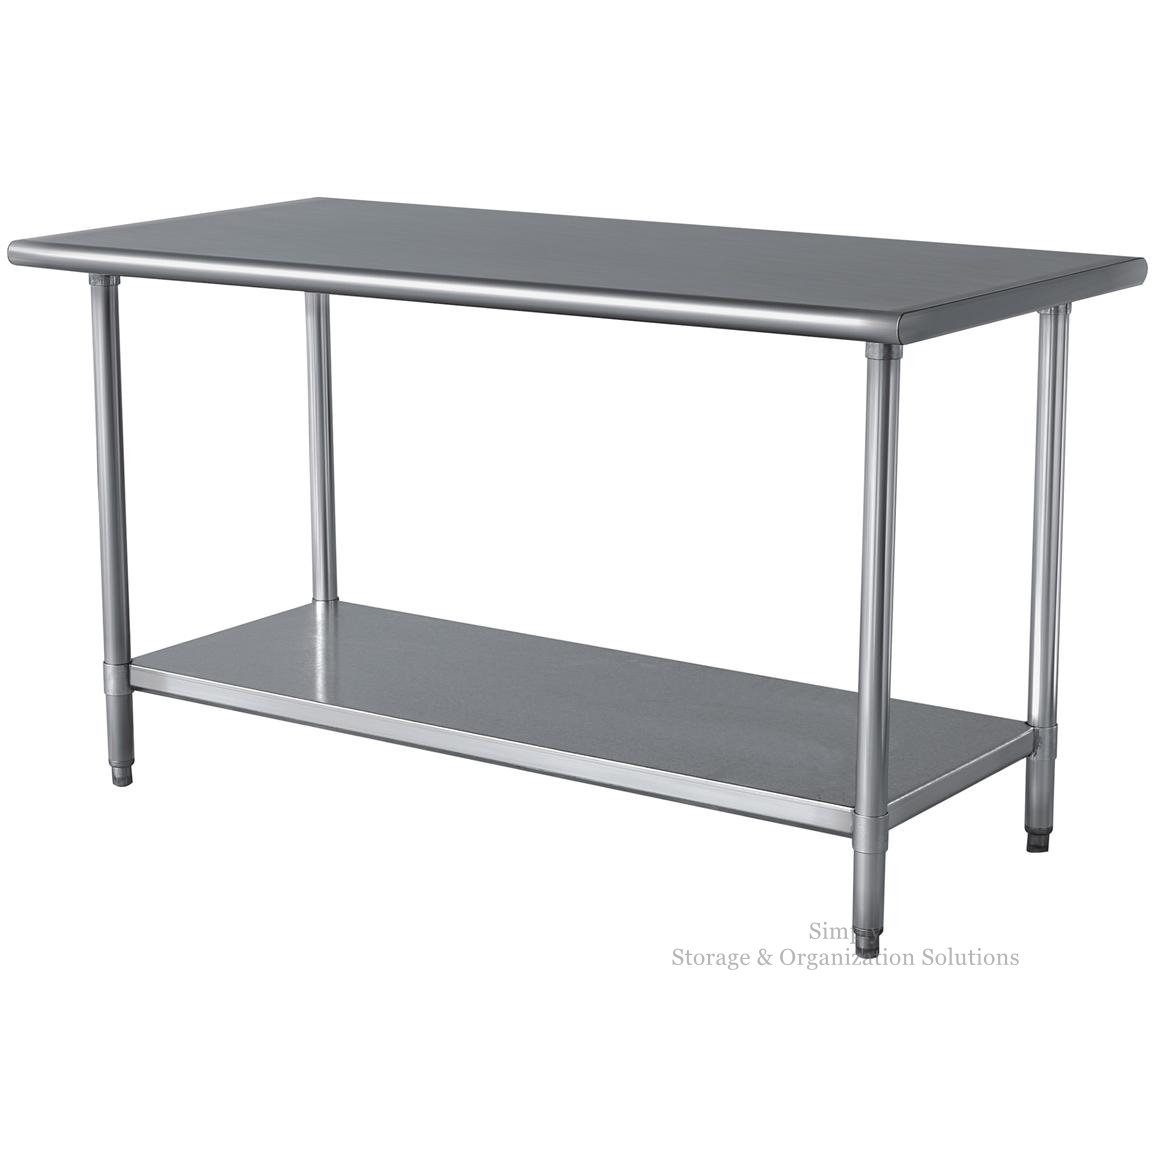 Heavy Gauge Stainless Steel Commercial Work Table with Undershelf